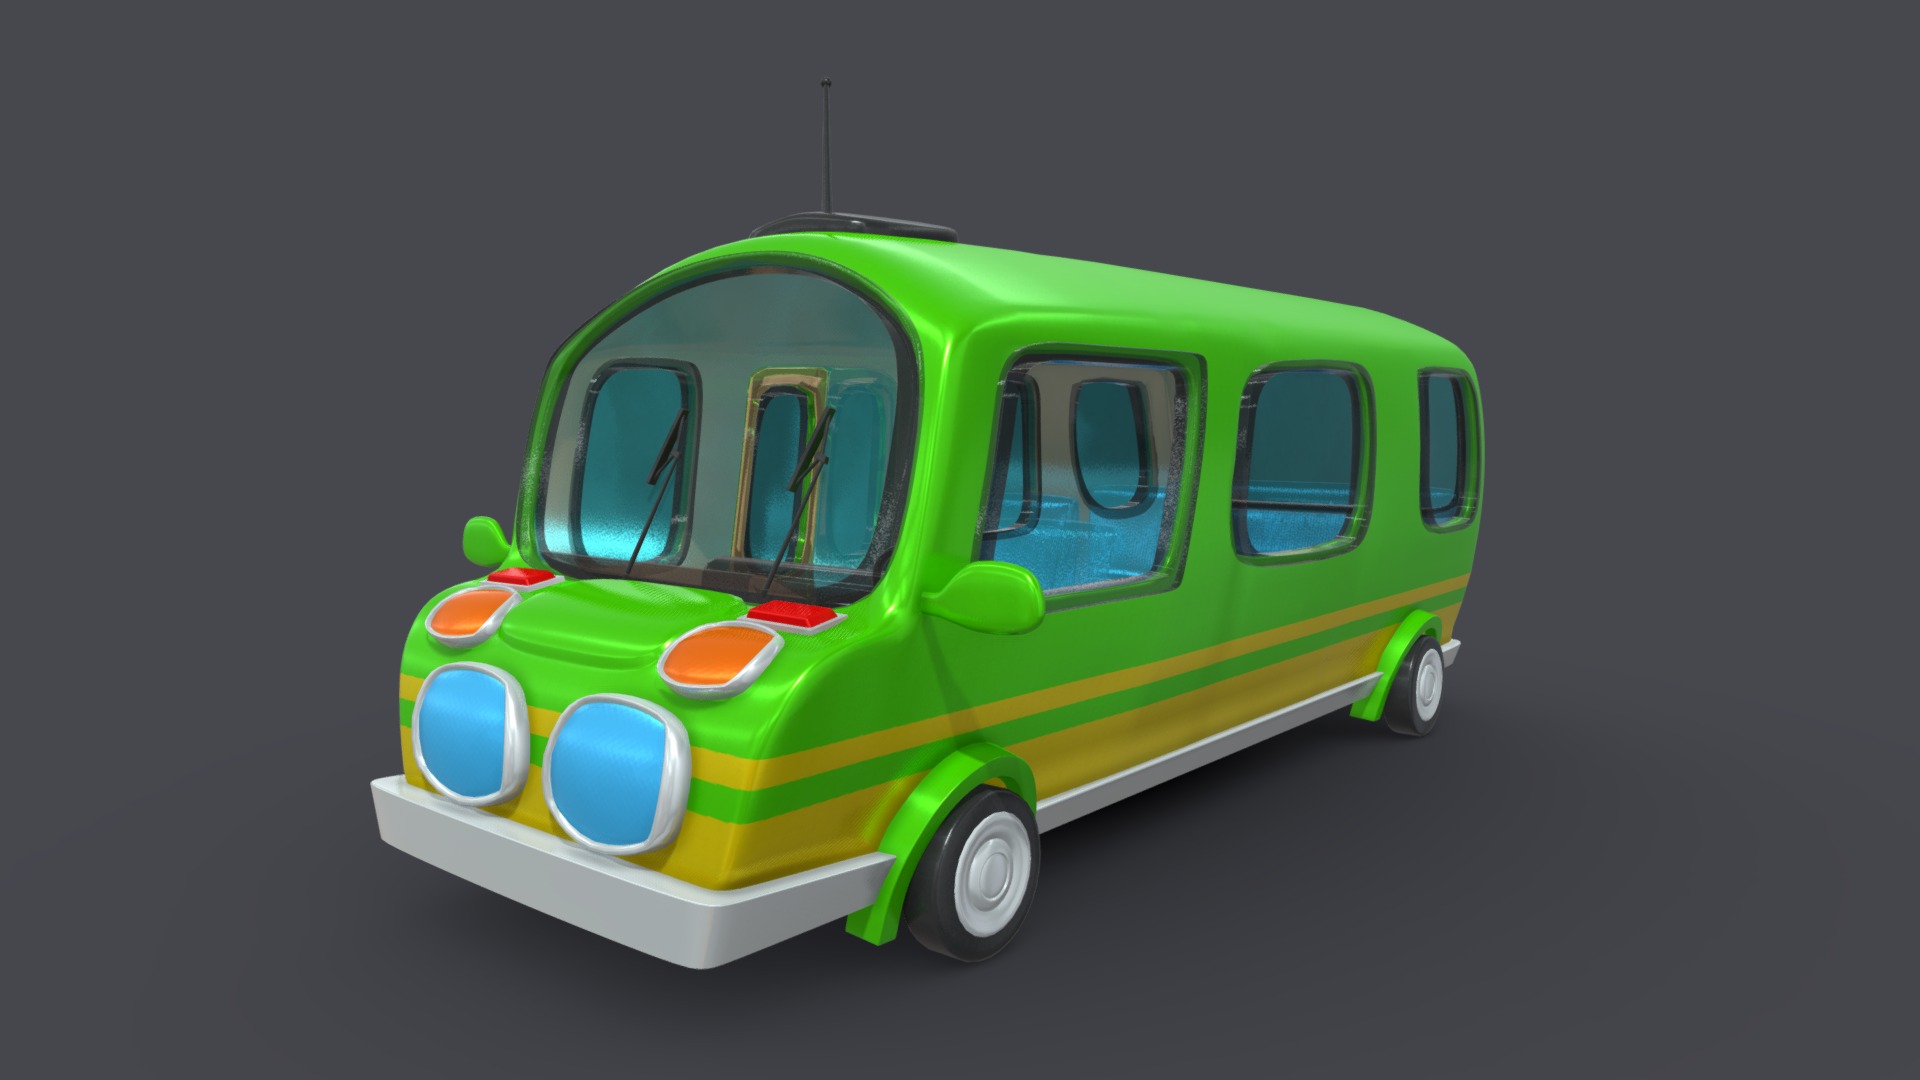 3D model Asset – Cartoons – Bus – 02 – 3D Model - This is a 3D model of the Asset - Cartoons - Bus - 02 - 3D Model. The 3D model is about a small green and yellow toy car.